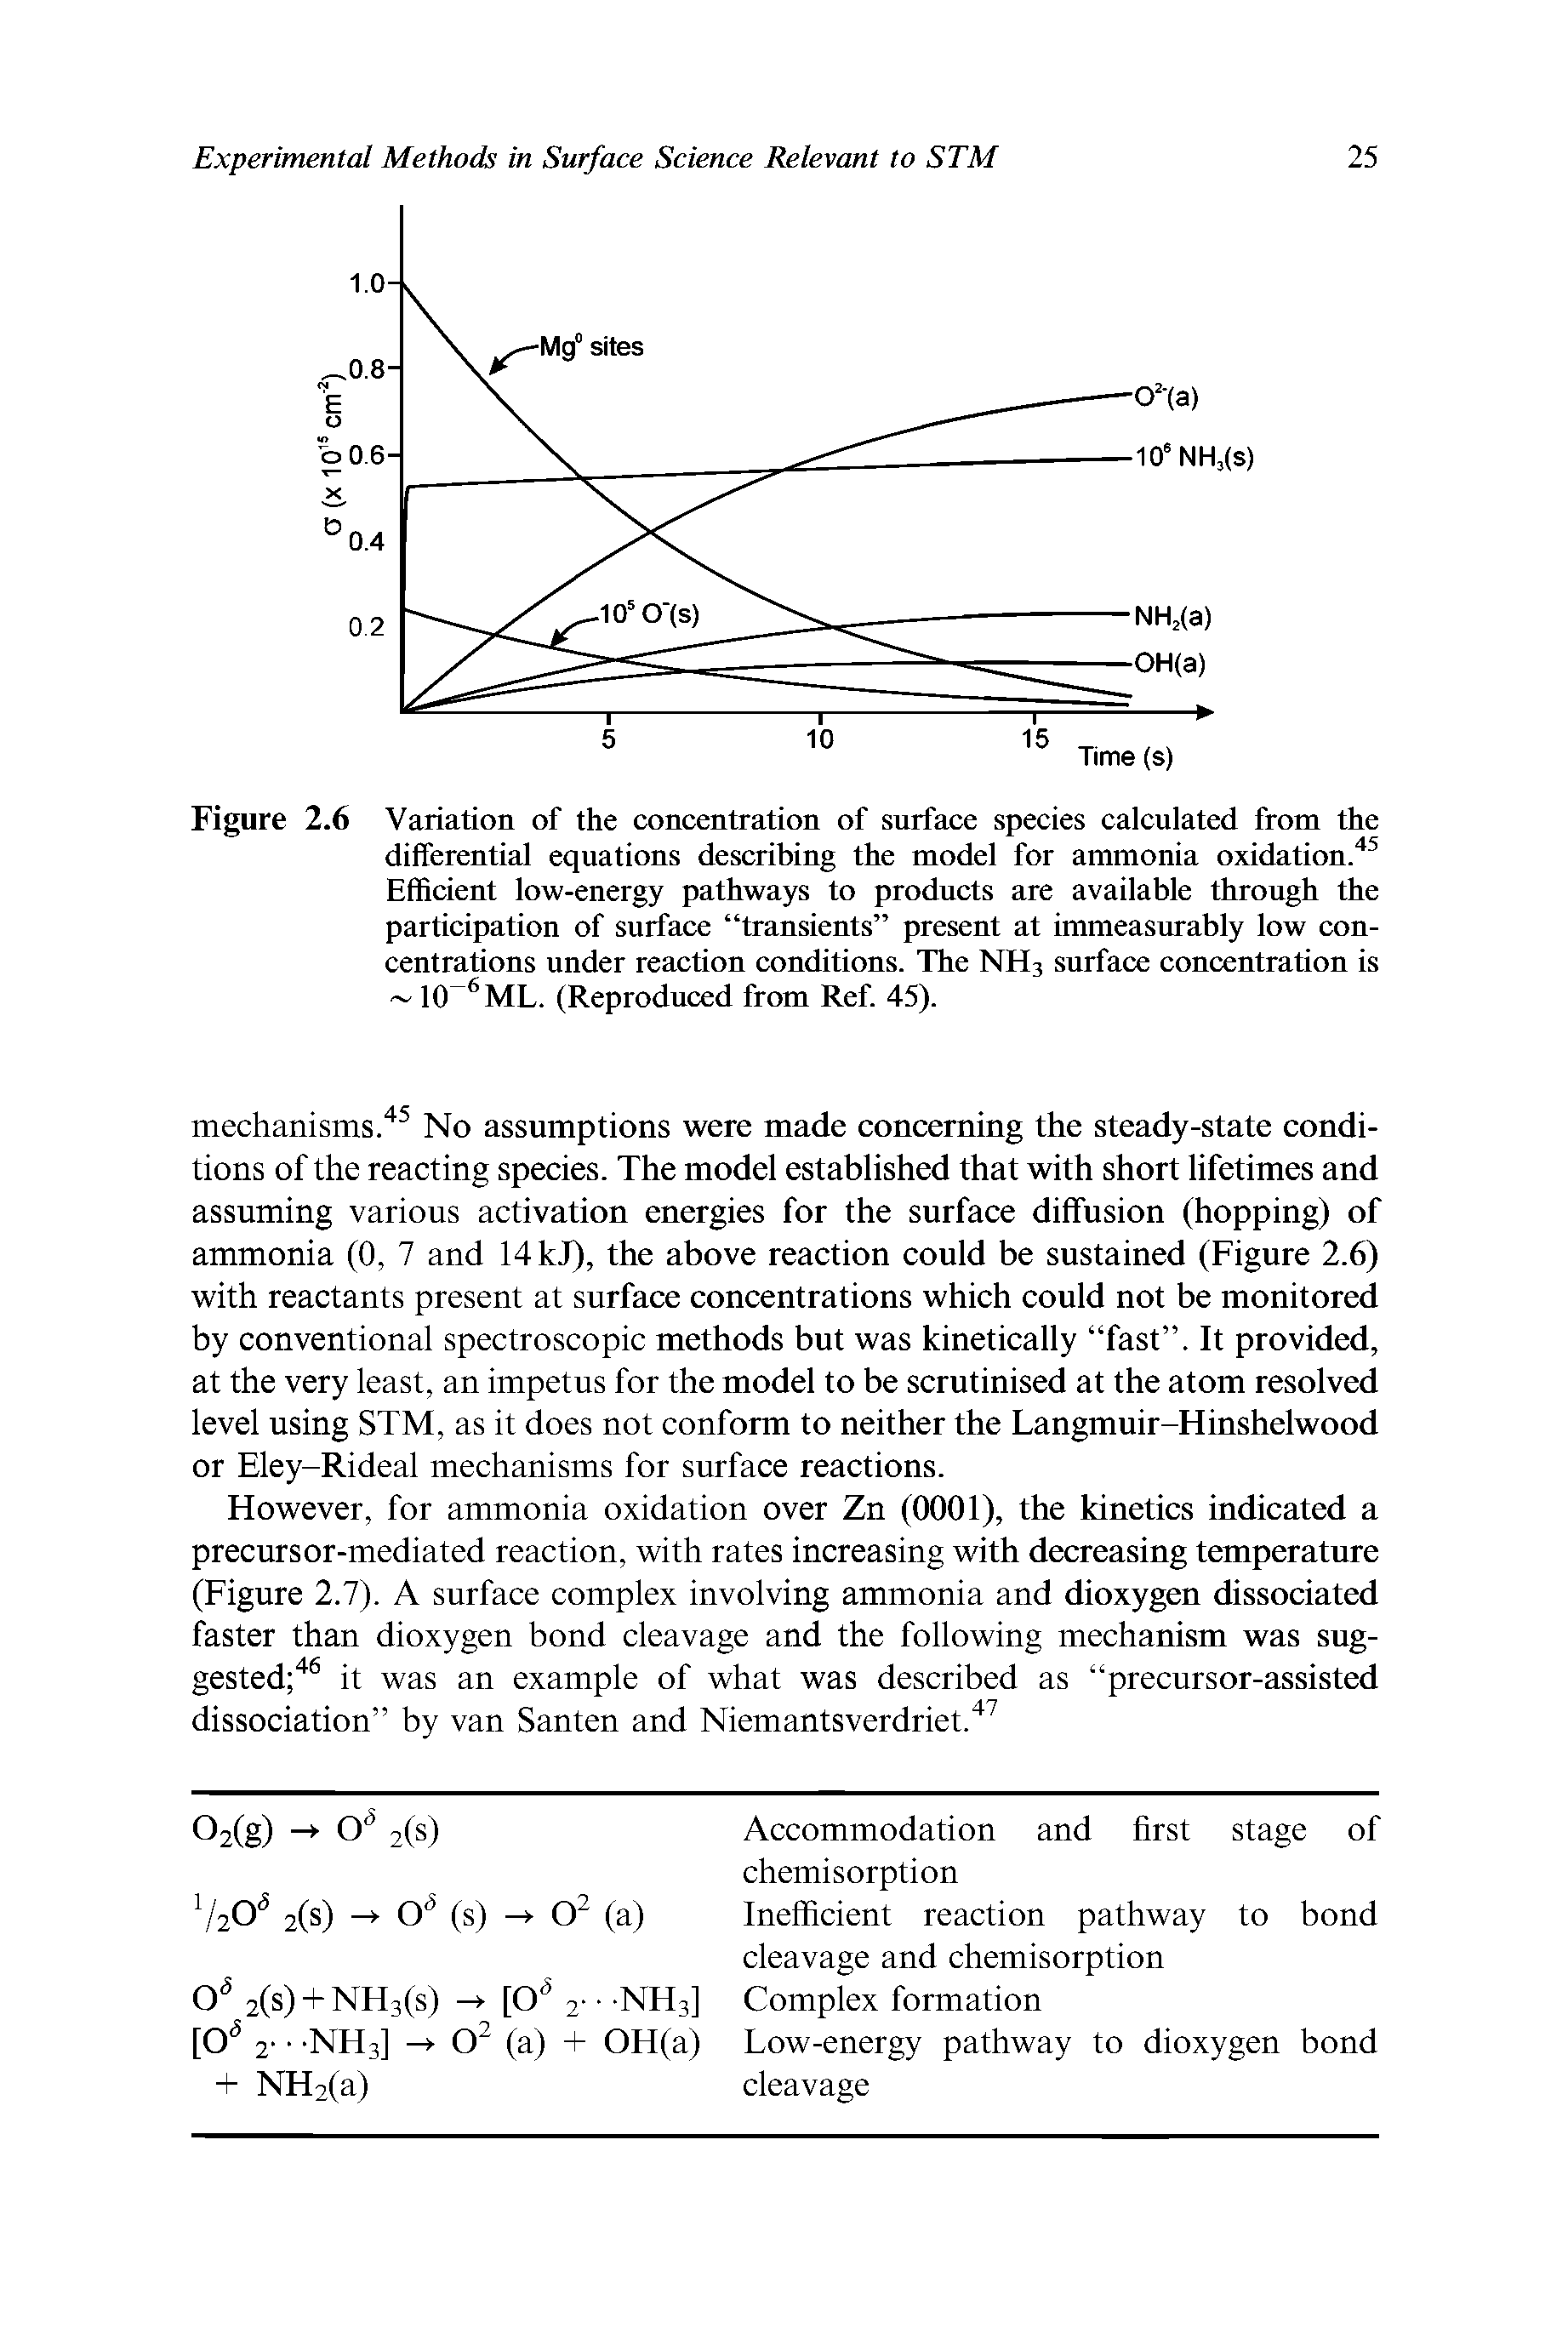 Figure 2.6 Variation of the concentration of surface species calculated from the differential equations describing the model for ammonia oxidation.45 Efficient low-energy pathways to products are available through the participation of surface transients present at immeasurably low concentrations under reaction conditions. The NH3 surface concentration is 10 6 ML. (Reproduced from Ref. 45).